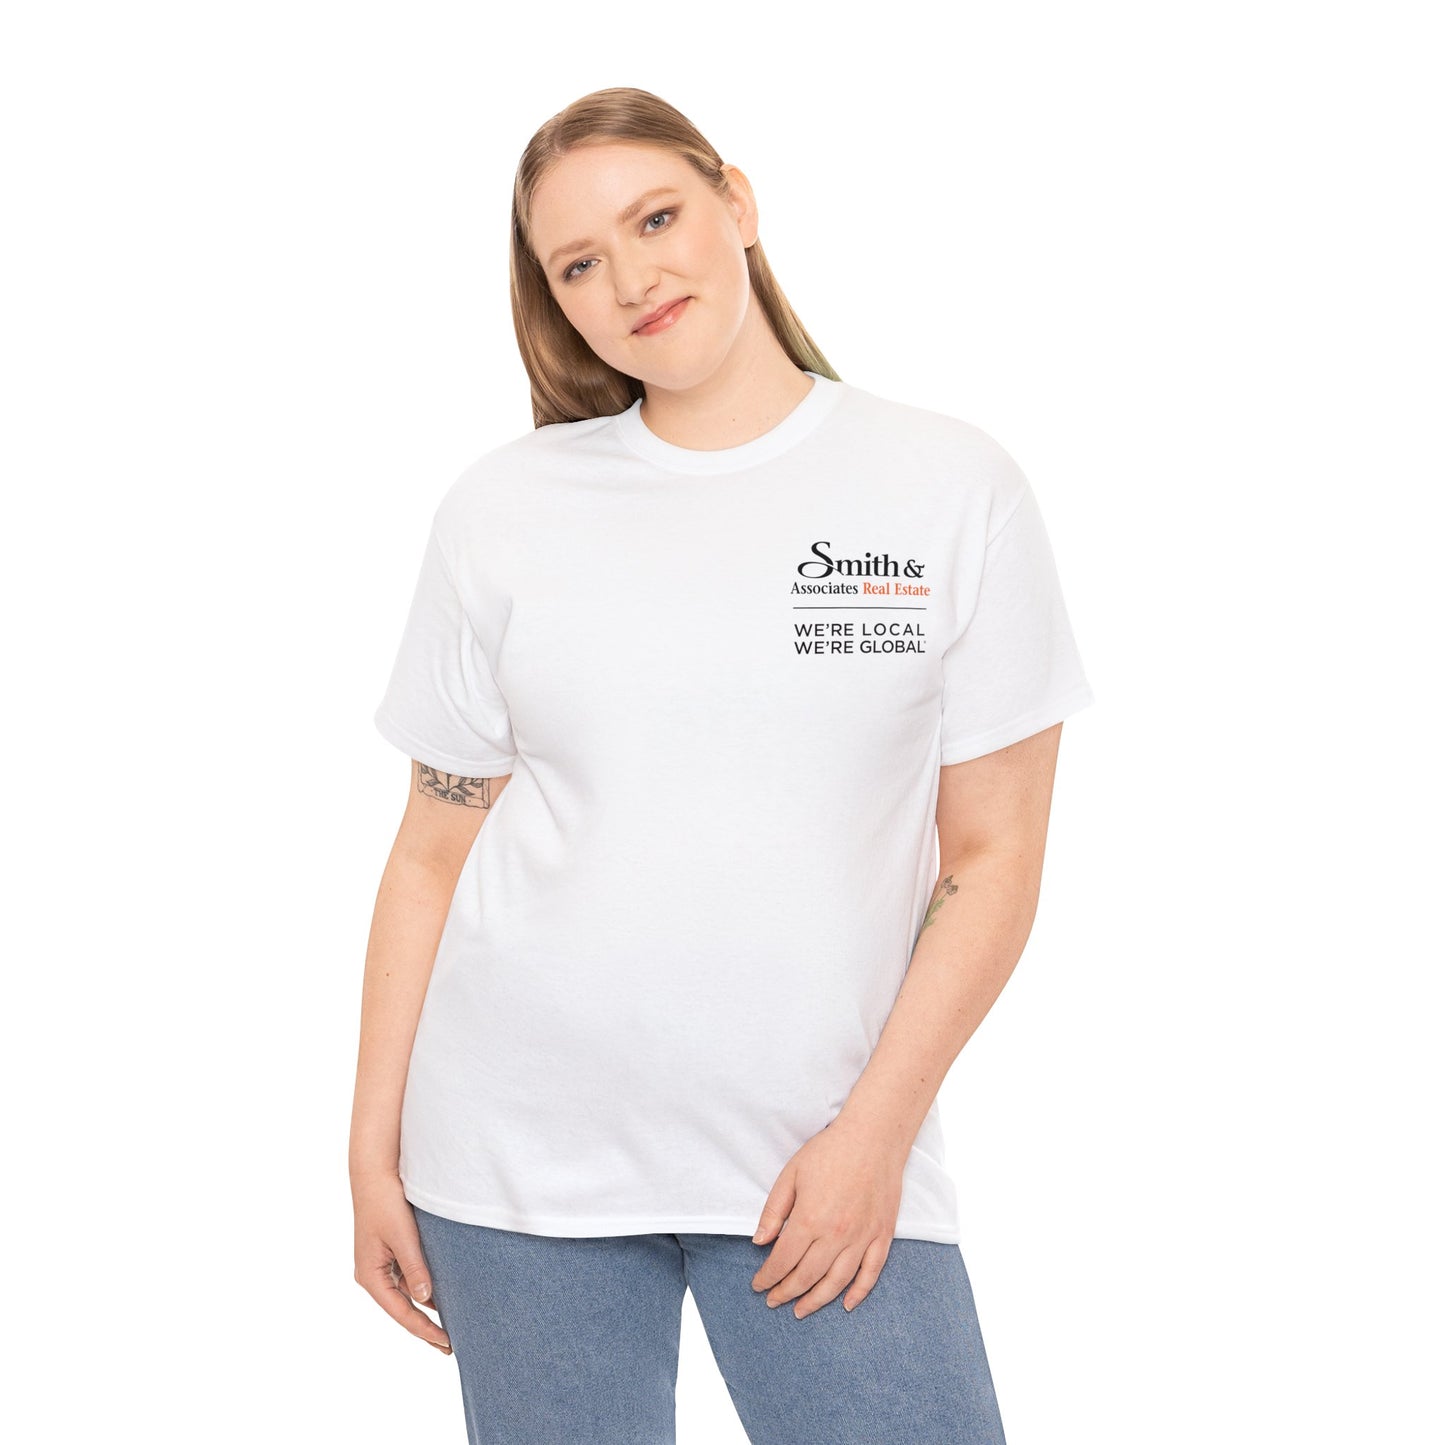 We're Local We're Global Smith & Associates T-Shirt